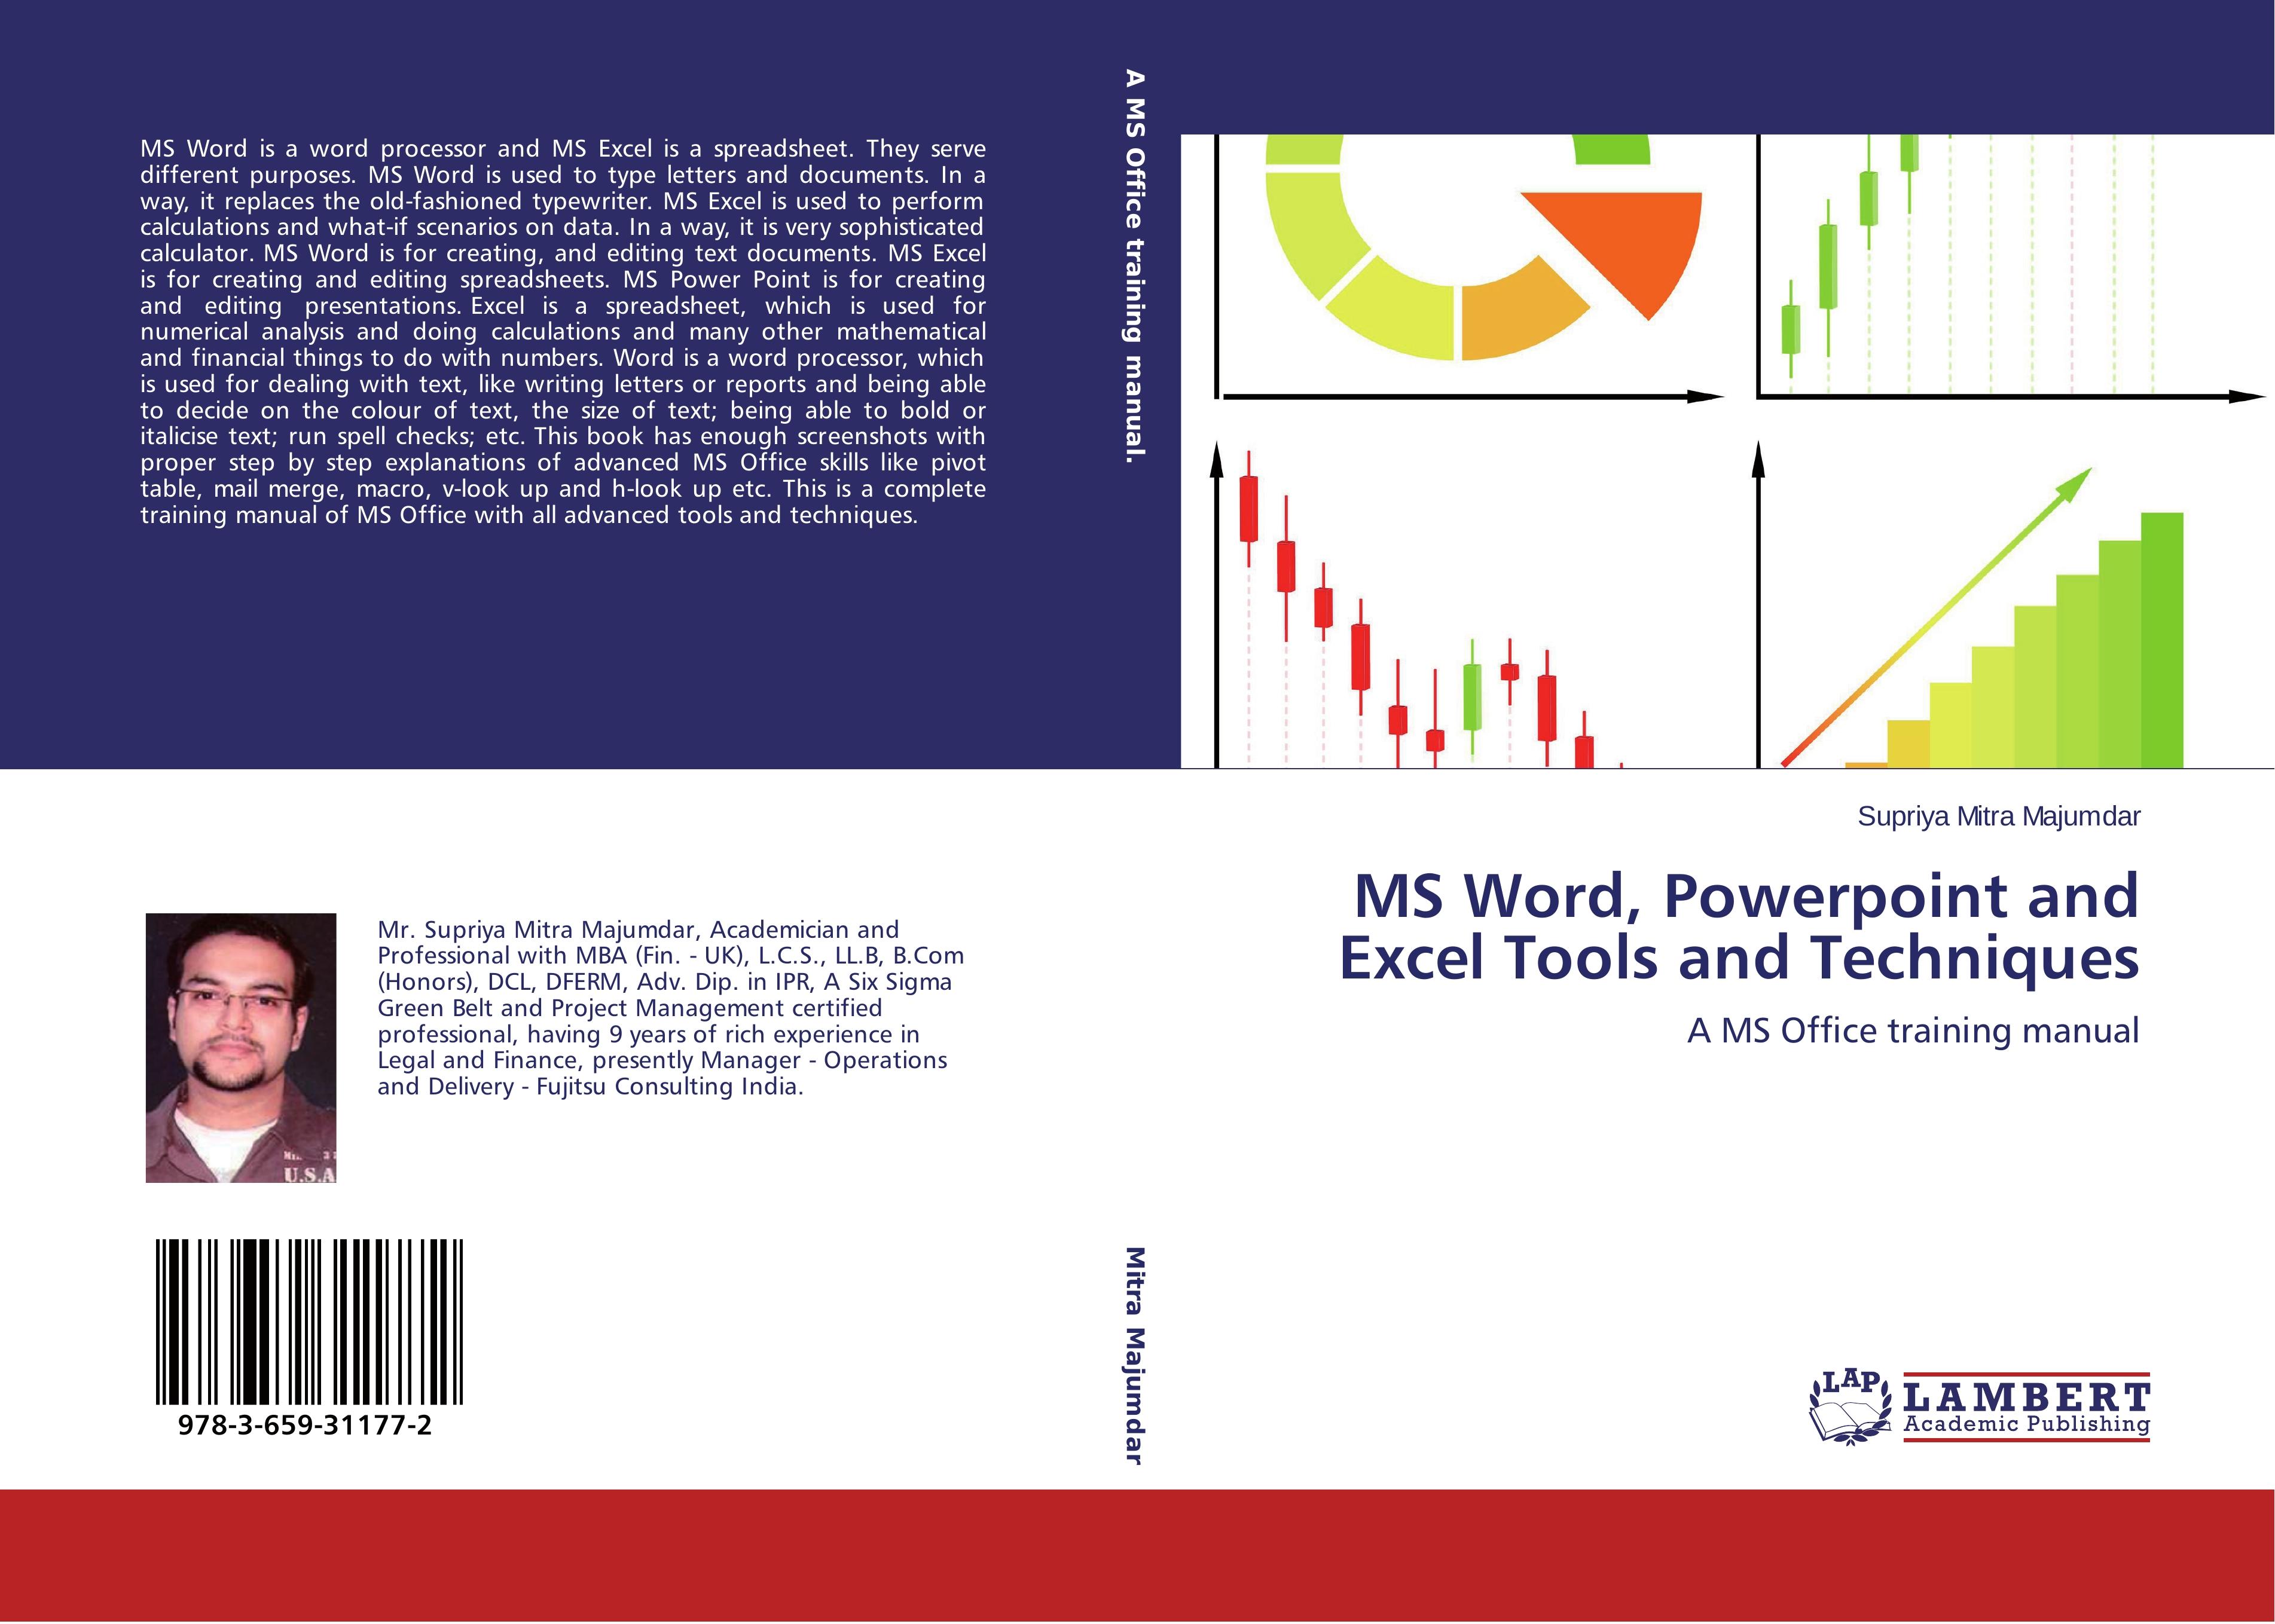 MS Word, Powerpoint and Excel Tools and Techniques - SUPRIYA MITRA MAJUMDAR